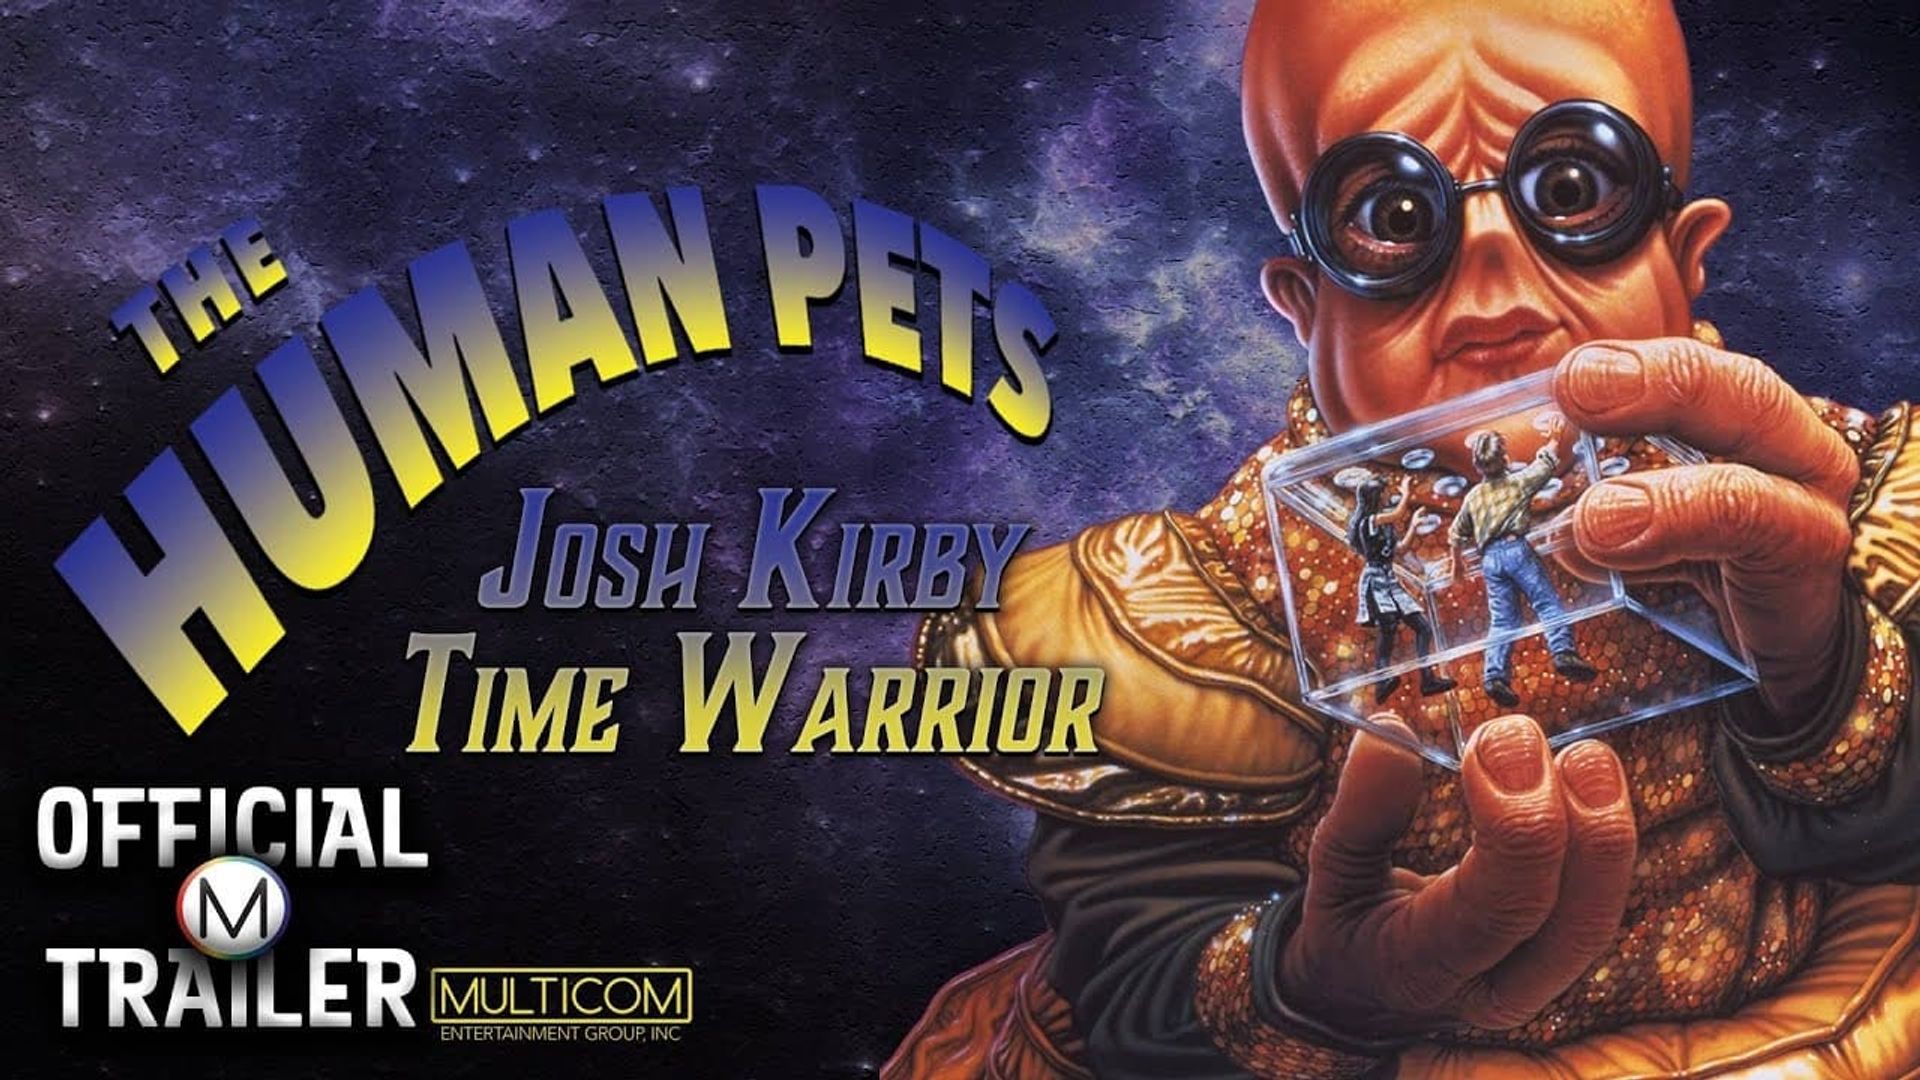 Josh Kirby: Time Warrior! Chap. 2: The Human Pets background